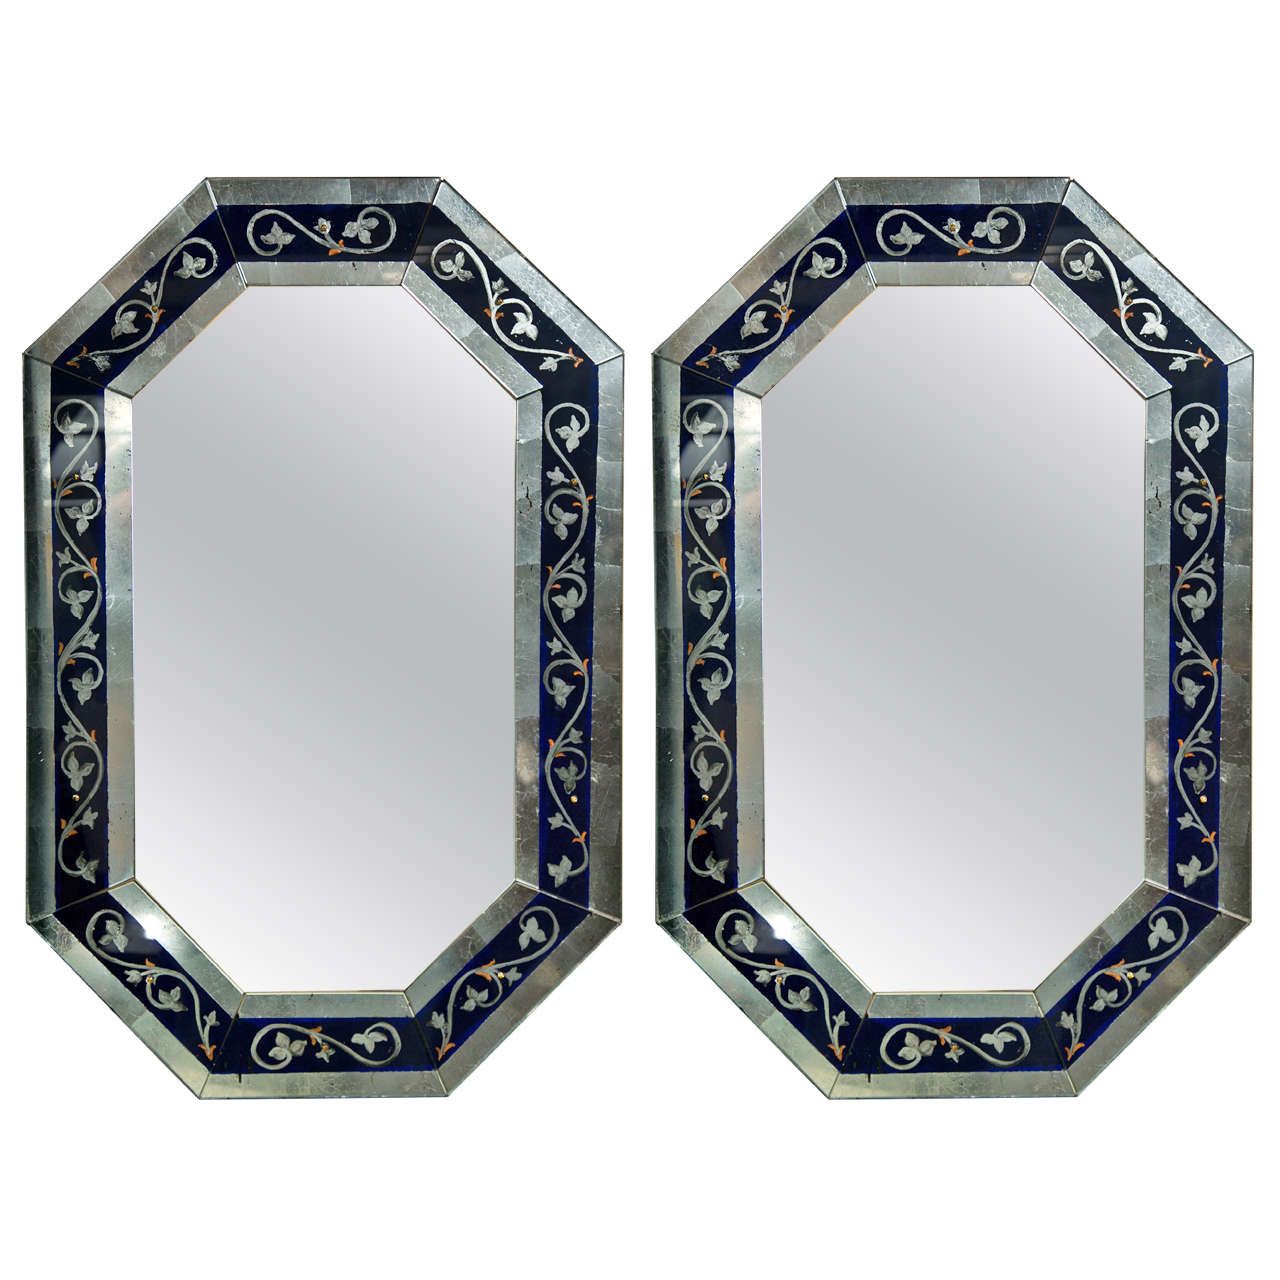 Pair Of Octagonal Silver Leaf Mirrors At 1stdibs Pertaining To Most Popular Metallic Gold Leaf Wall Mirrors (View 6 of 15)